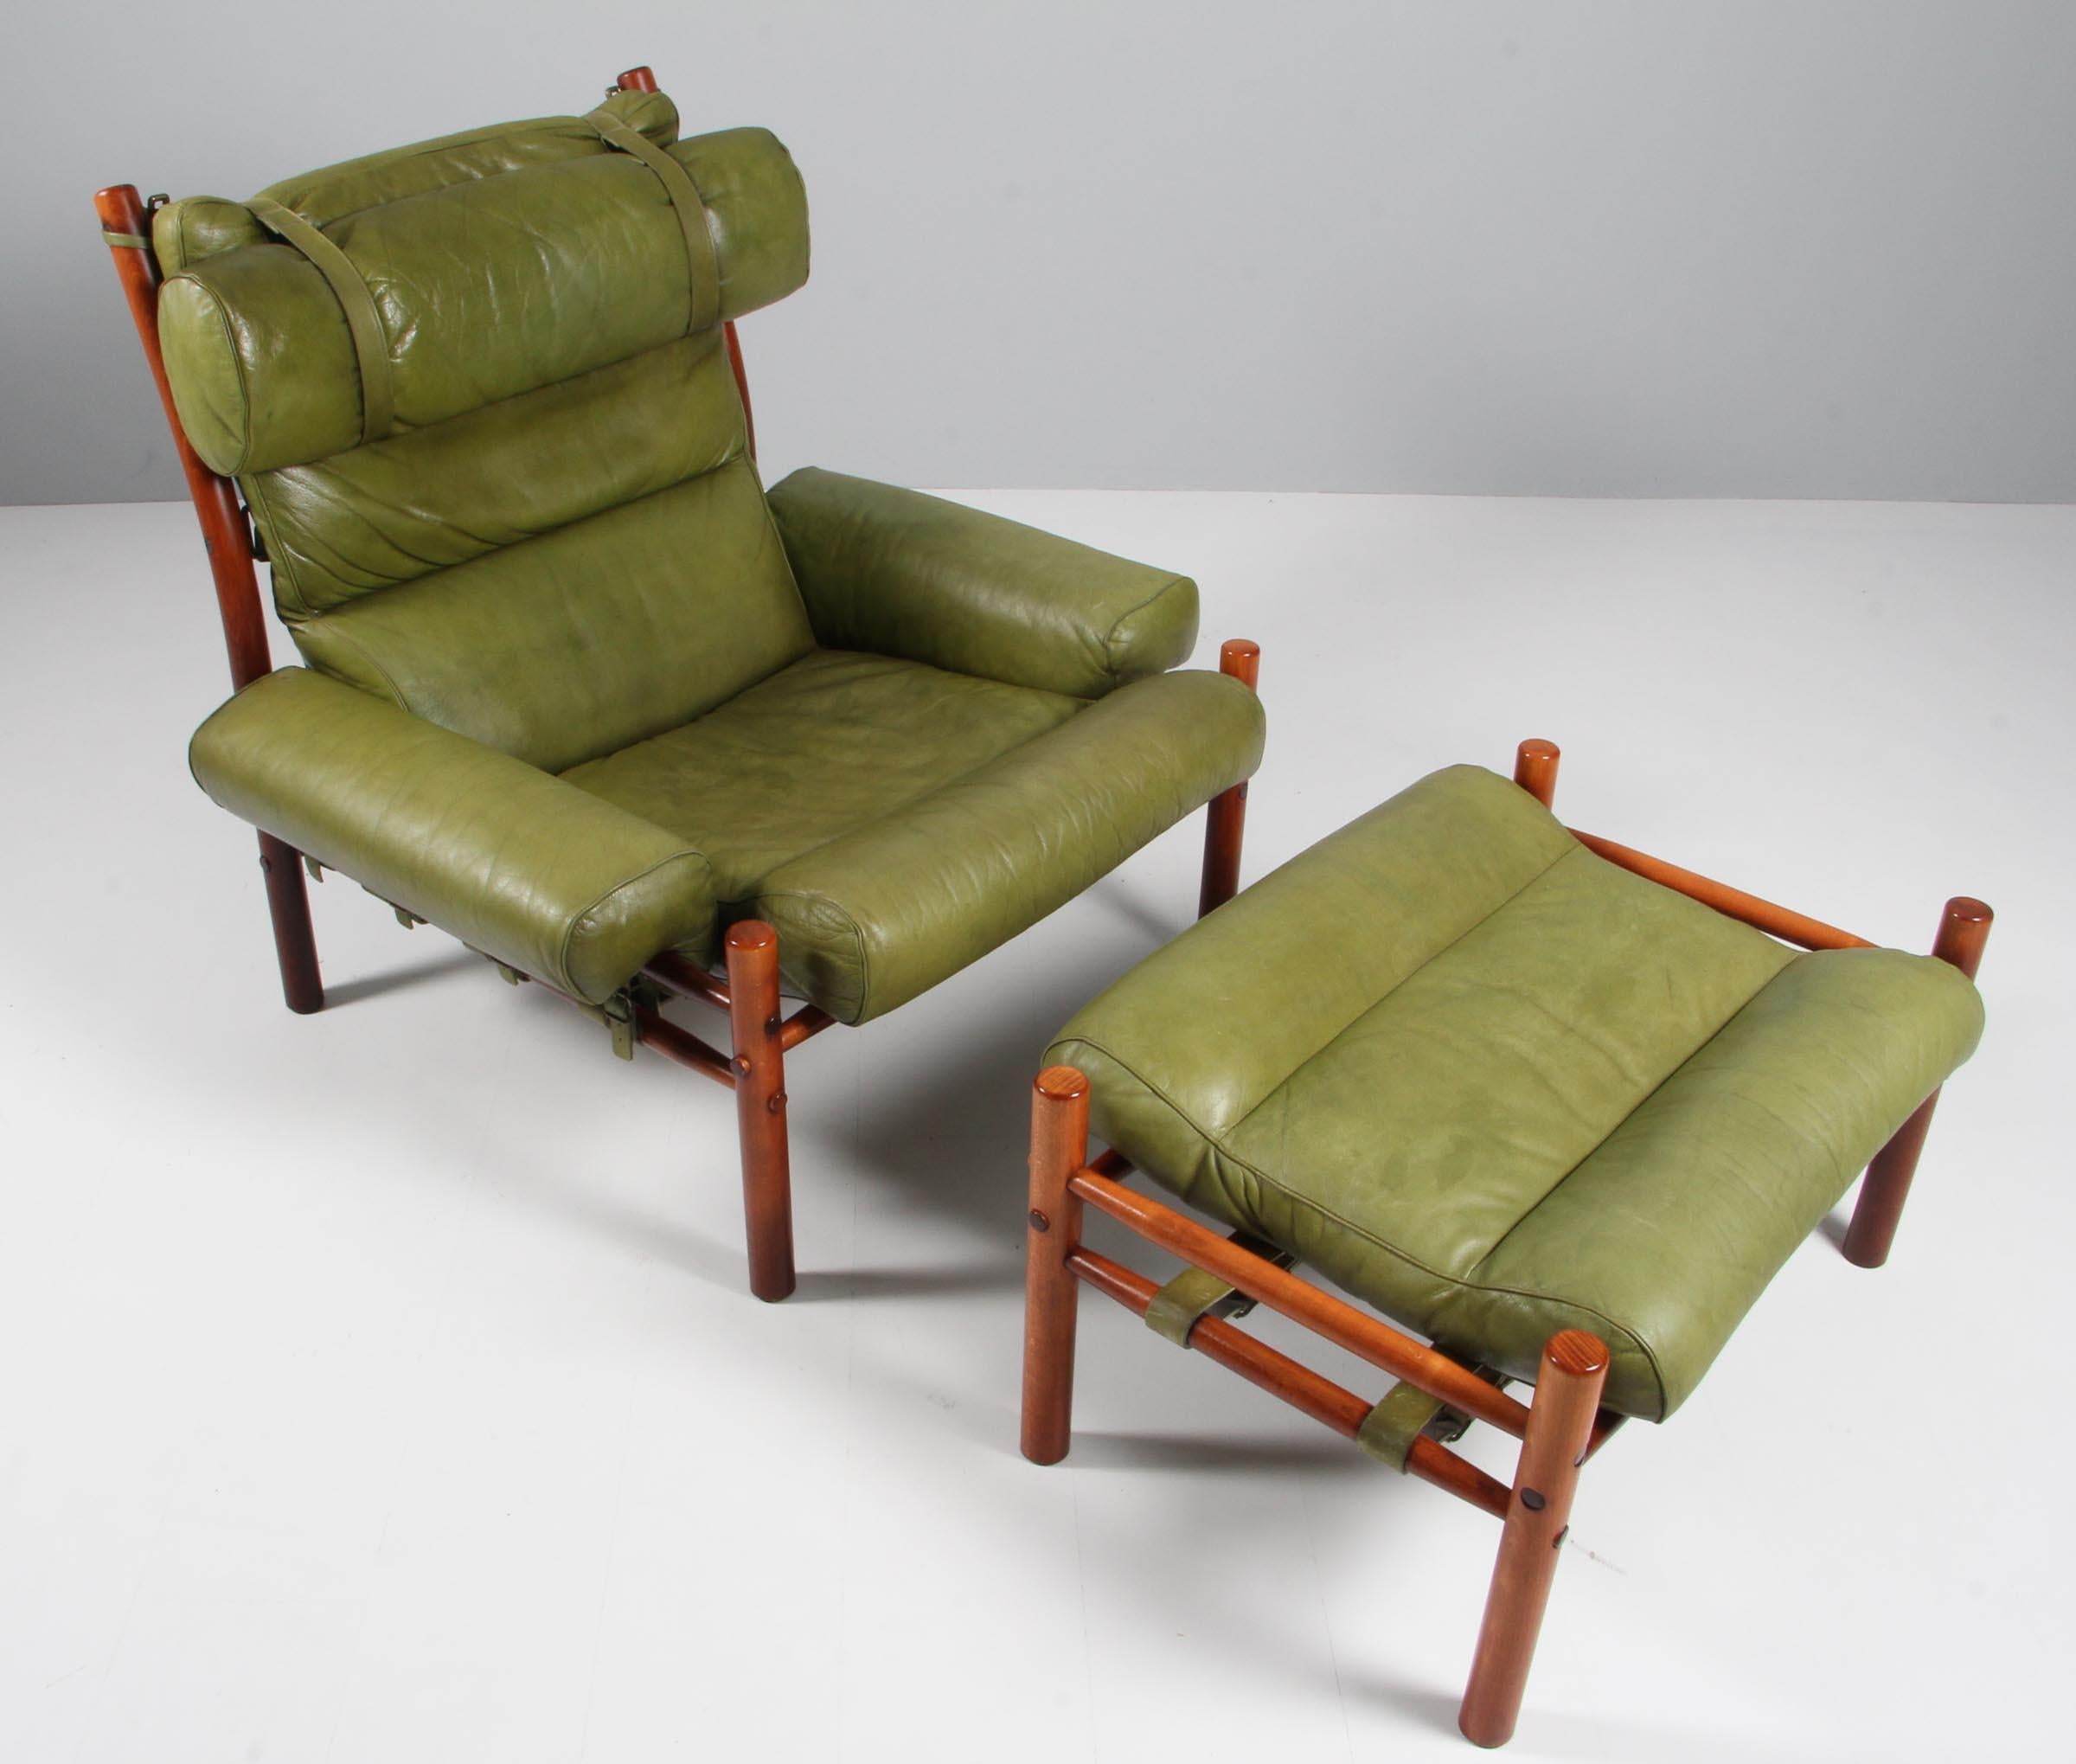 Arne Norell, 'Inca' lounge chair with ottoman, leather, beech, Sweden, 1965.

The iconic 'Inca' lounge chair with ottoman in beautiful aged leather, designed by Arne Norell. The back features thick buffalo leather with some minor signs of wear.